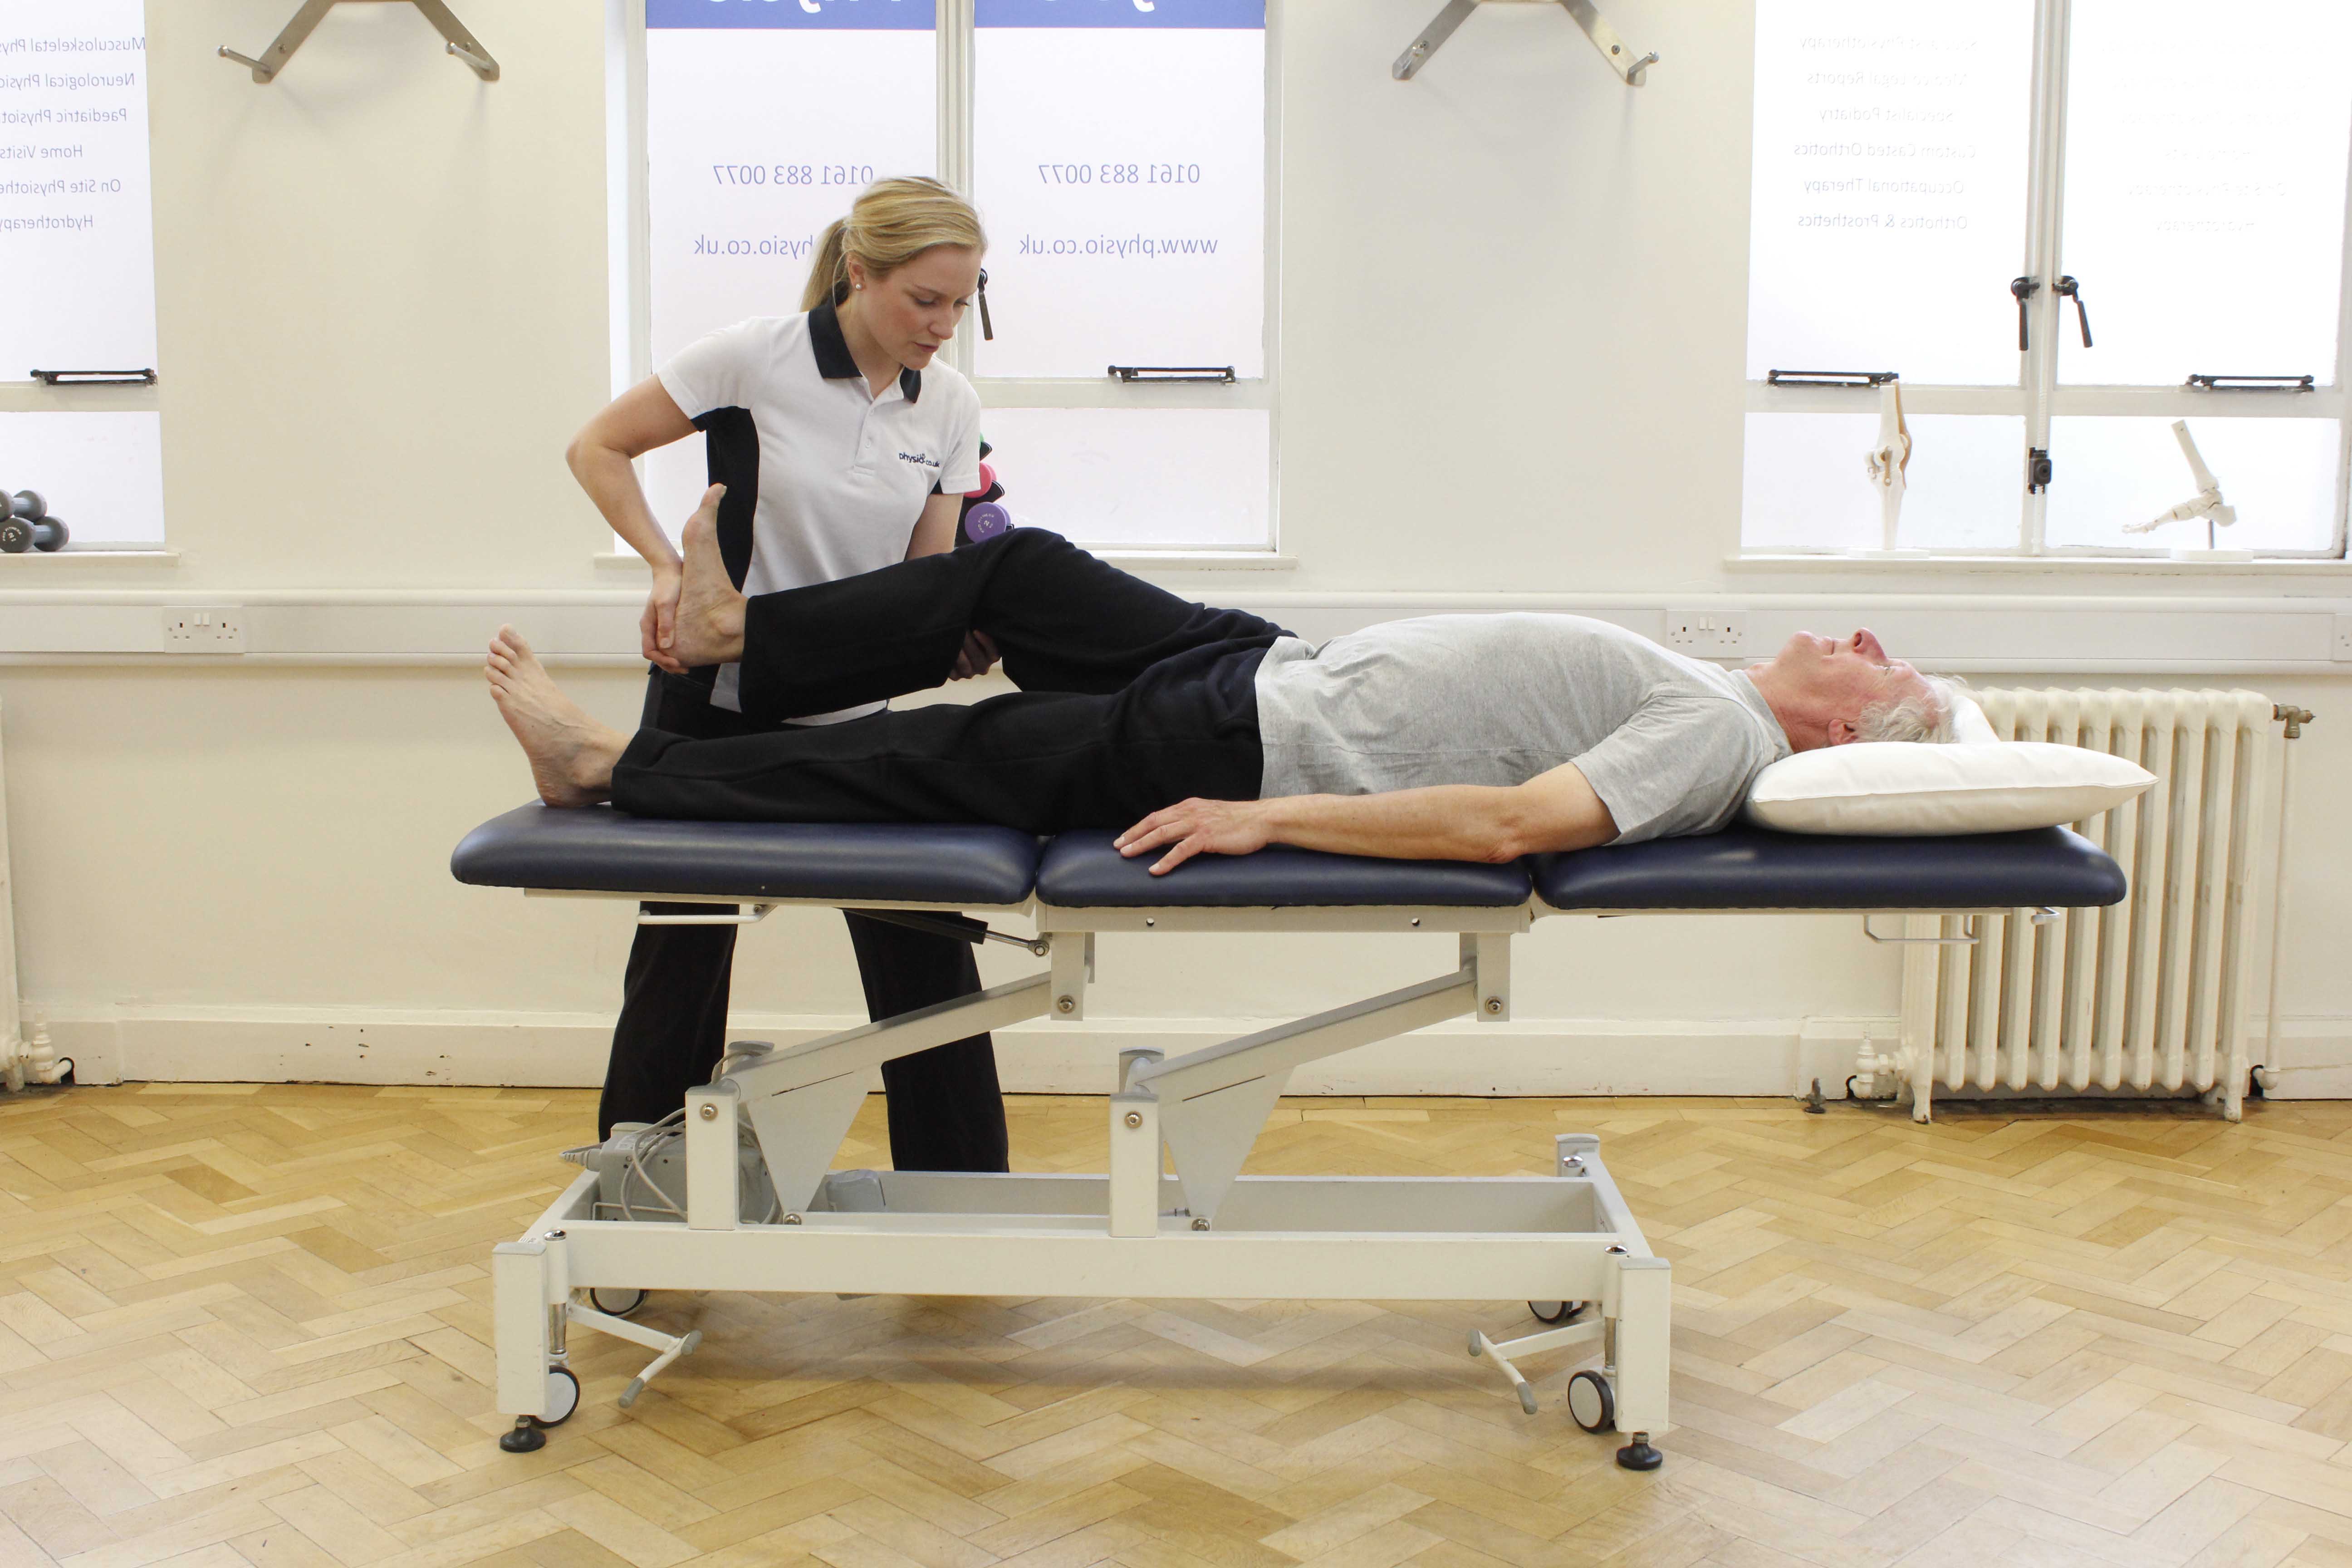 Moblisations and stretches of the hip, knee and ankle by an experienced physiotherapist